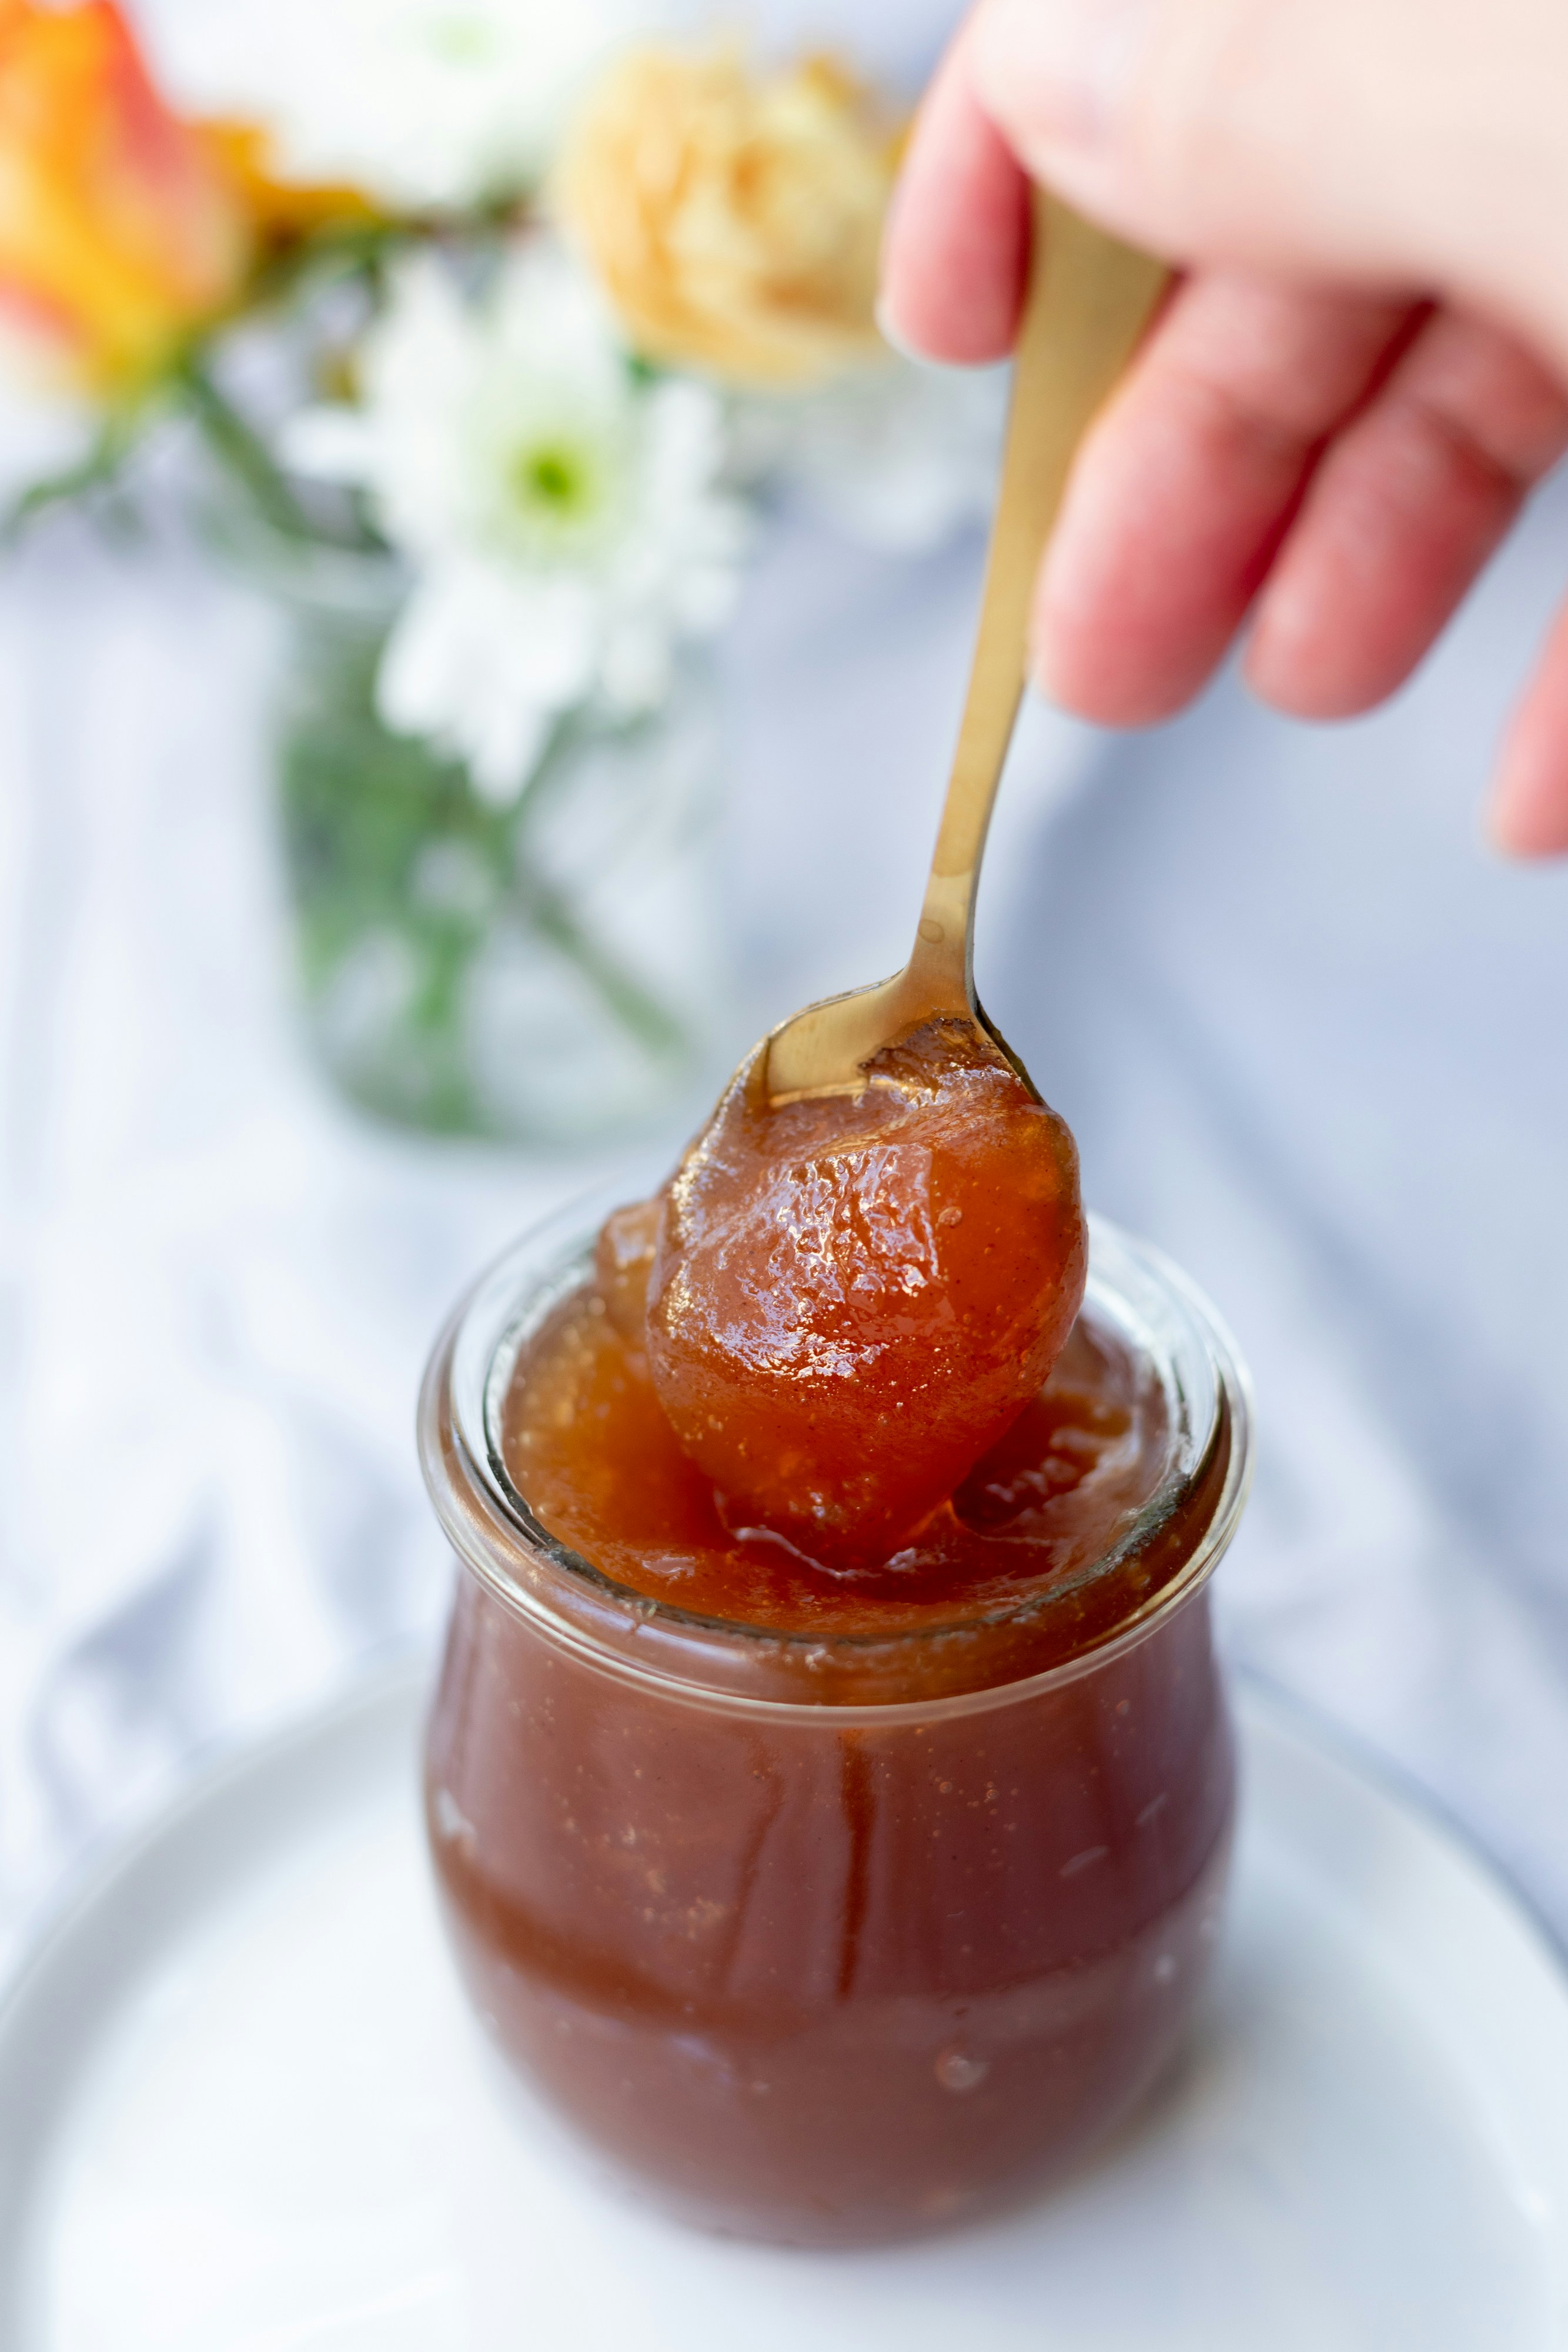 marmalade made of apples is luscious food that keeps you warm inside even on the coldest gloomiest day